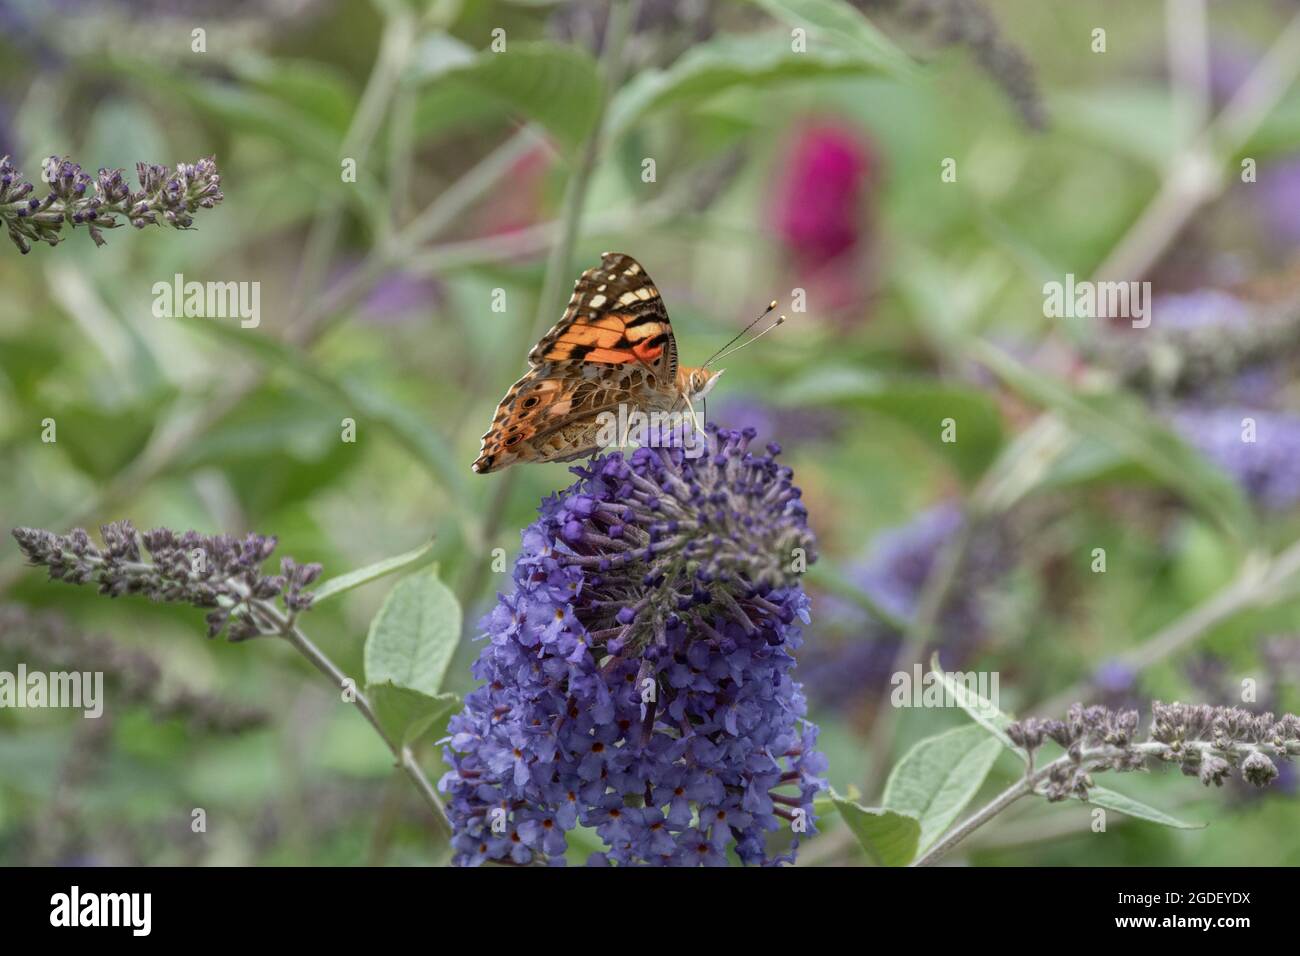 Buddleja davidii 'Summer House Blue' (buddleia variety), known as a butterfly bush, in flower during summer, UK, with a painted lady butterfly Stock Photo